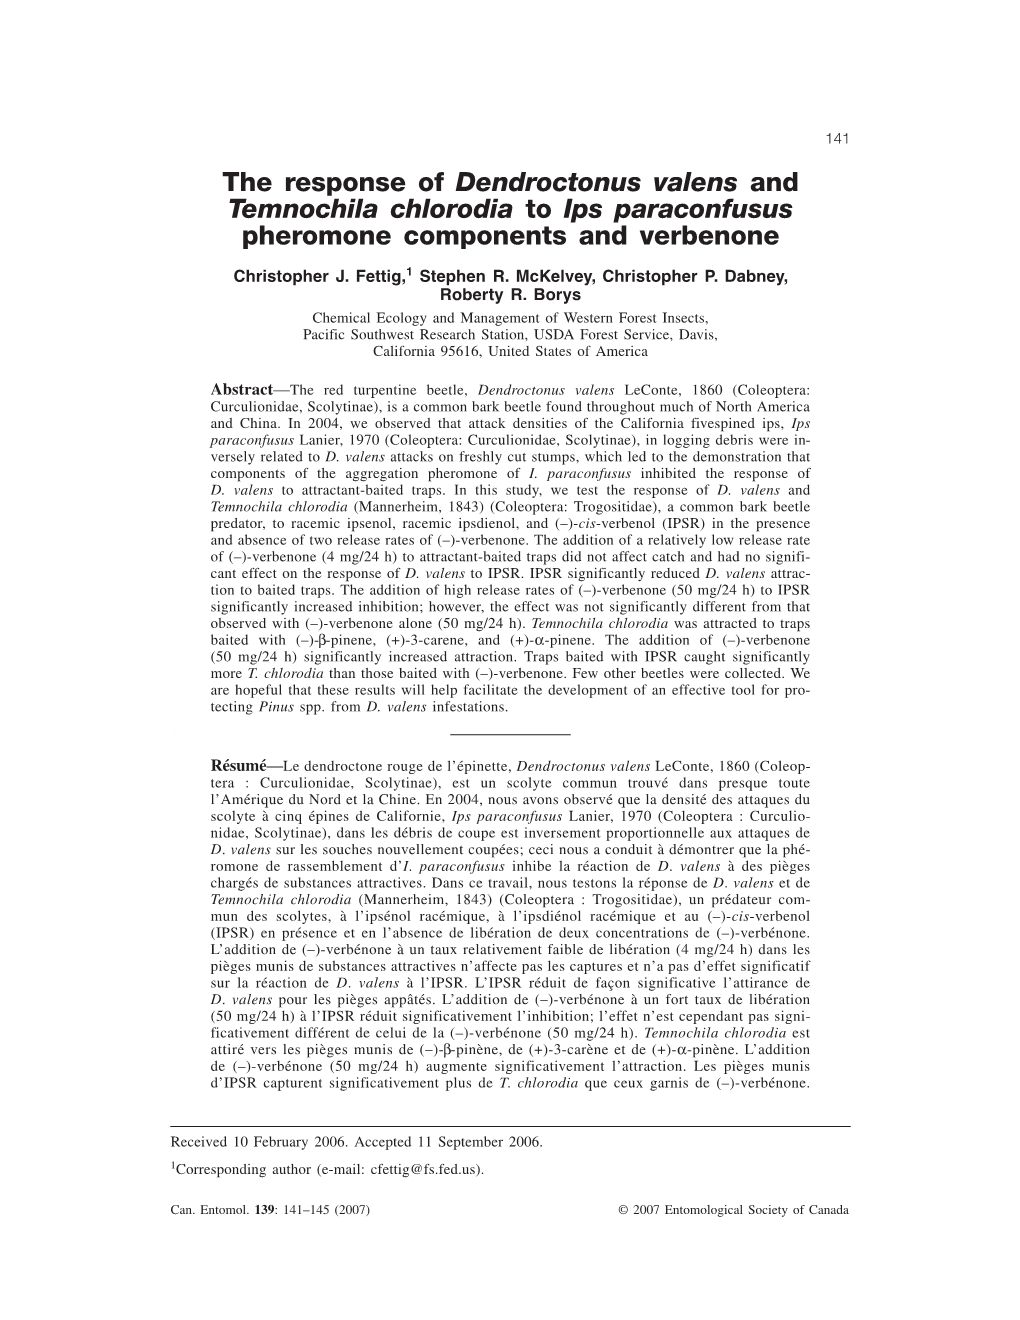 The Response of Dendroctonus Valens and Temnochila Chlorodia to Ips Paraconfusus Pheromone Components and Verbenone